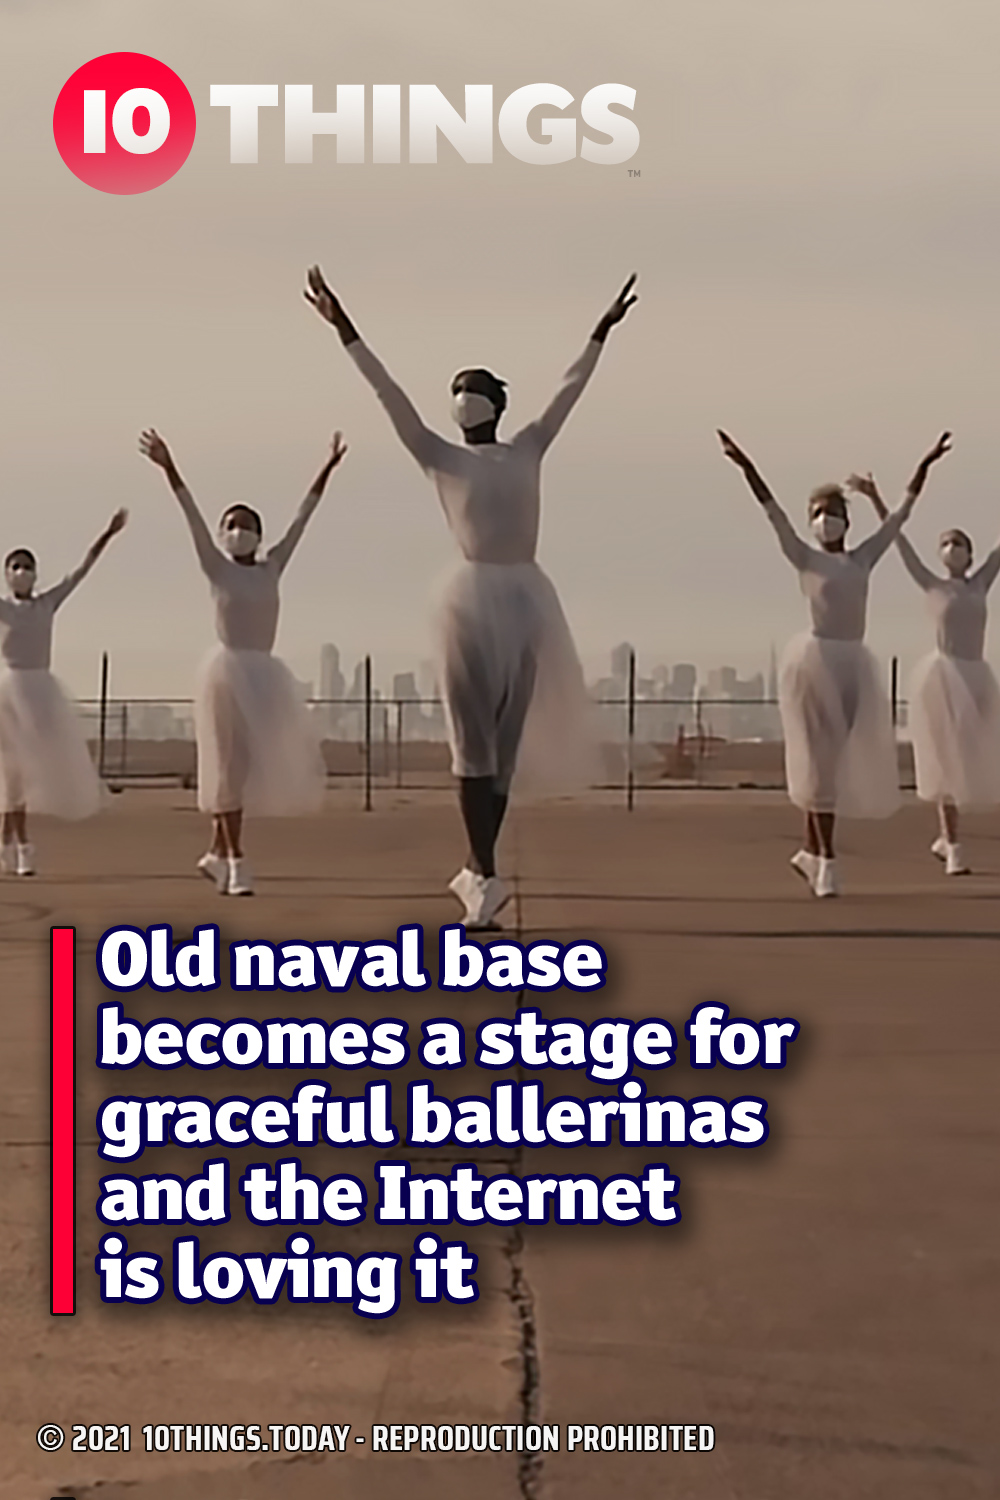 Old naval base becomes a stage for graceful ballerinas and the Internet is loving it